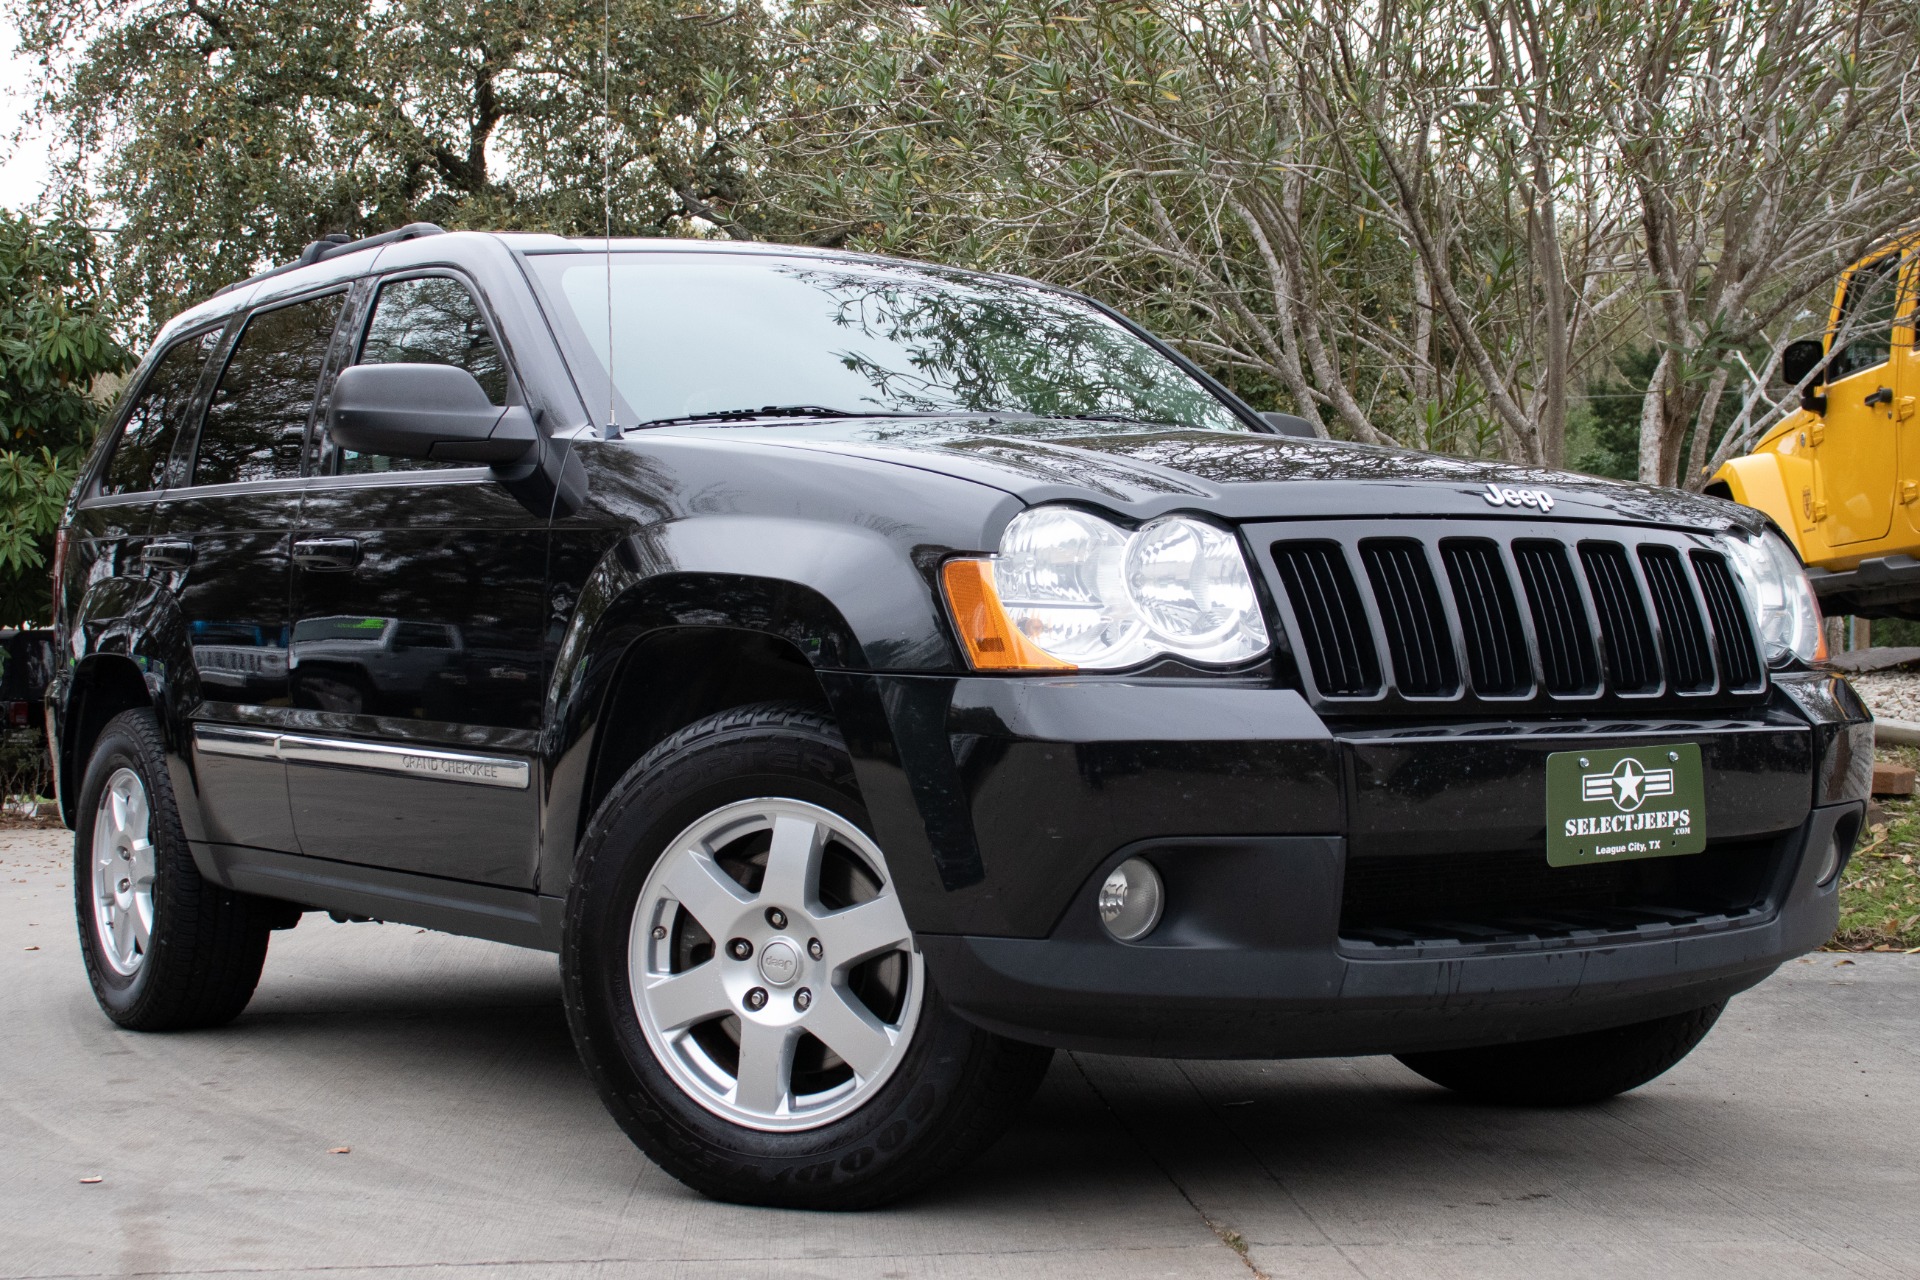 Used 2010 Jeep Grand Cherokee SRT8 for Sale in Houston, TX